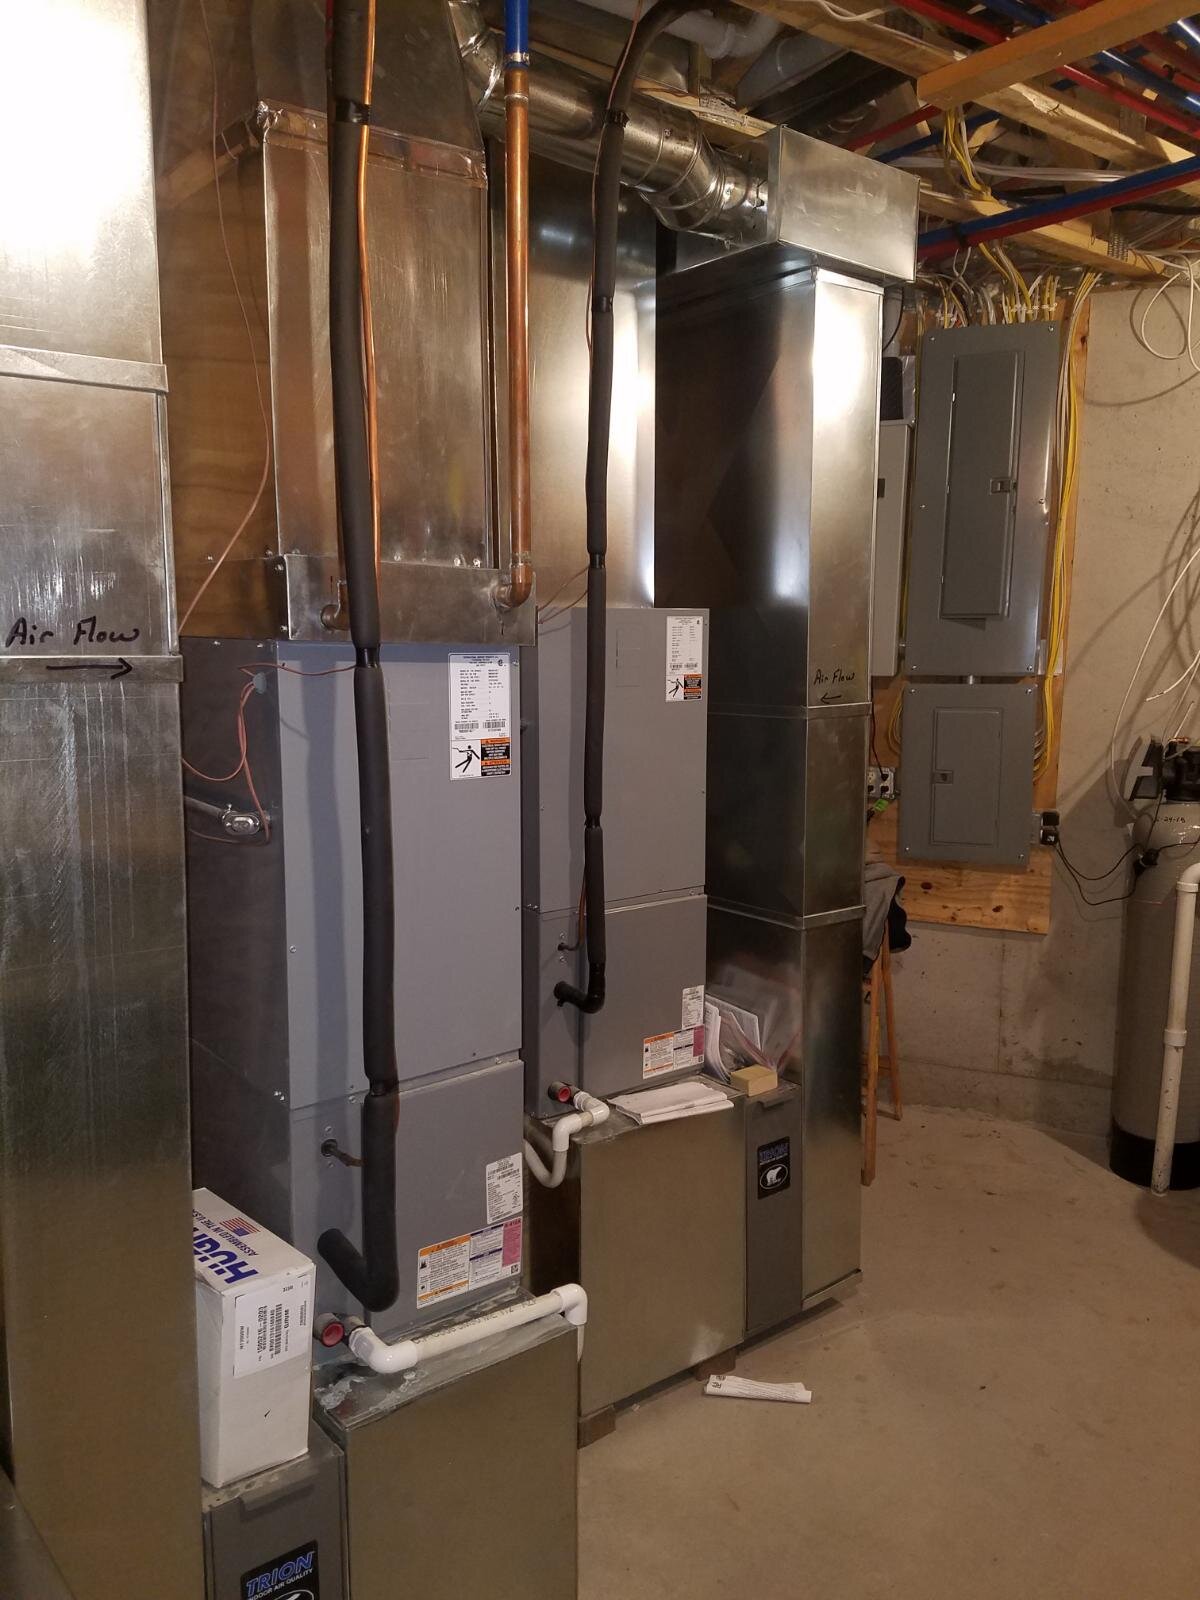  In Wisconsin, air handlers are an important part of a complete boiler heating system. An air handler can be fitted with an evaporation coil connected to an outdoor compressor to provide cooling in the summer. A water coil connected to the boiler, al